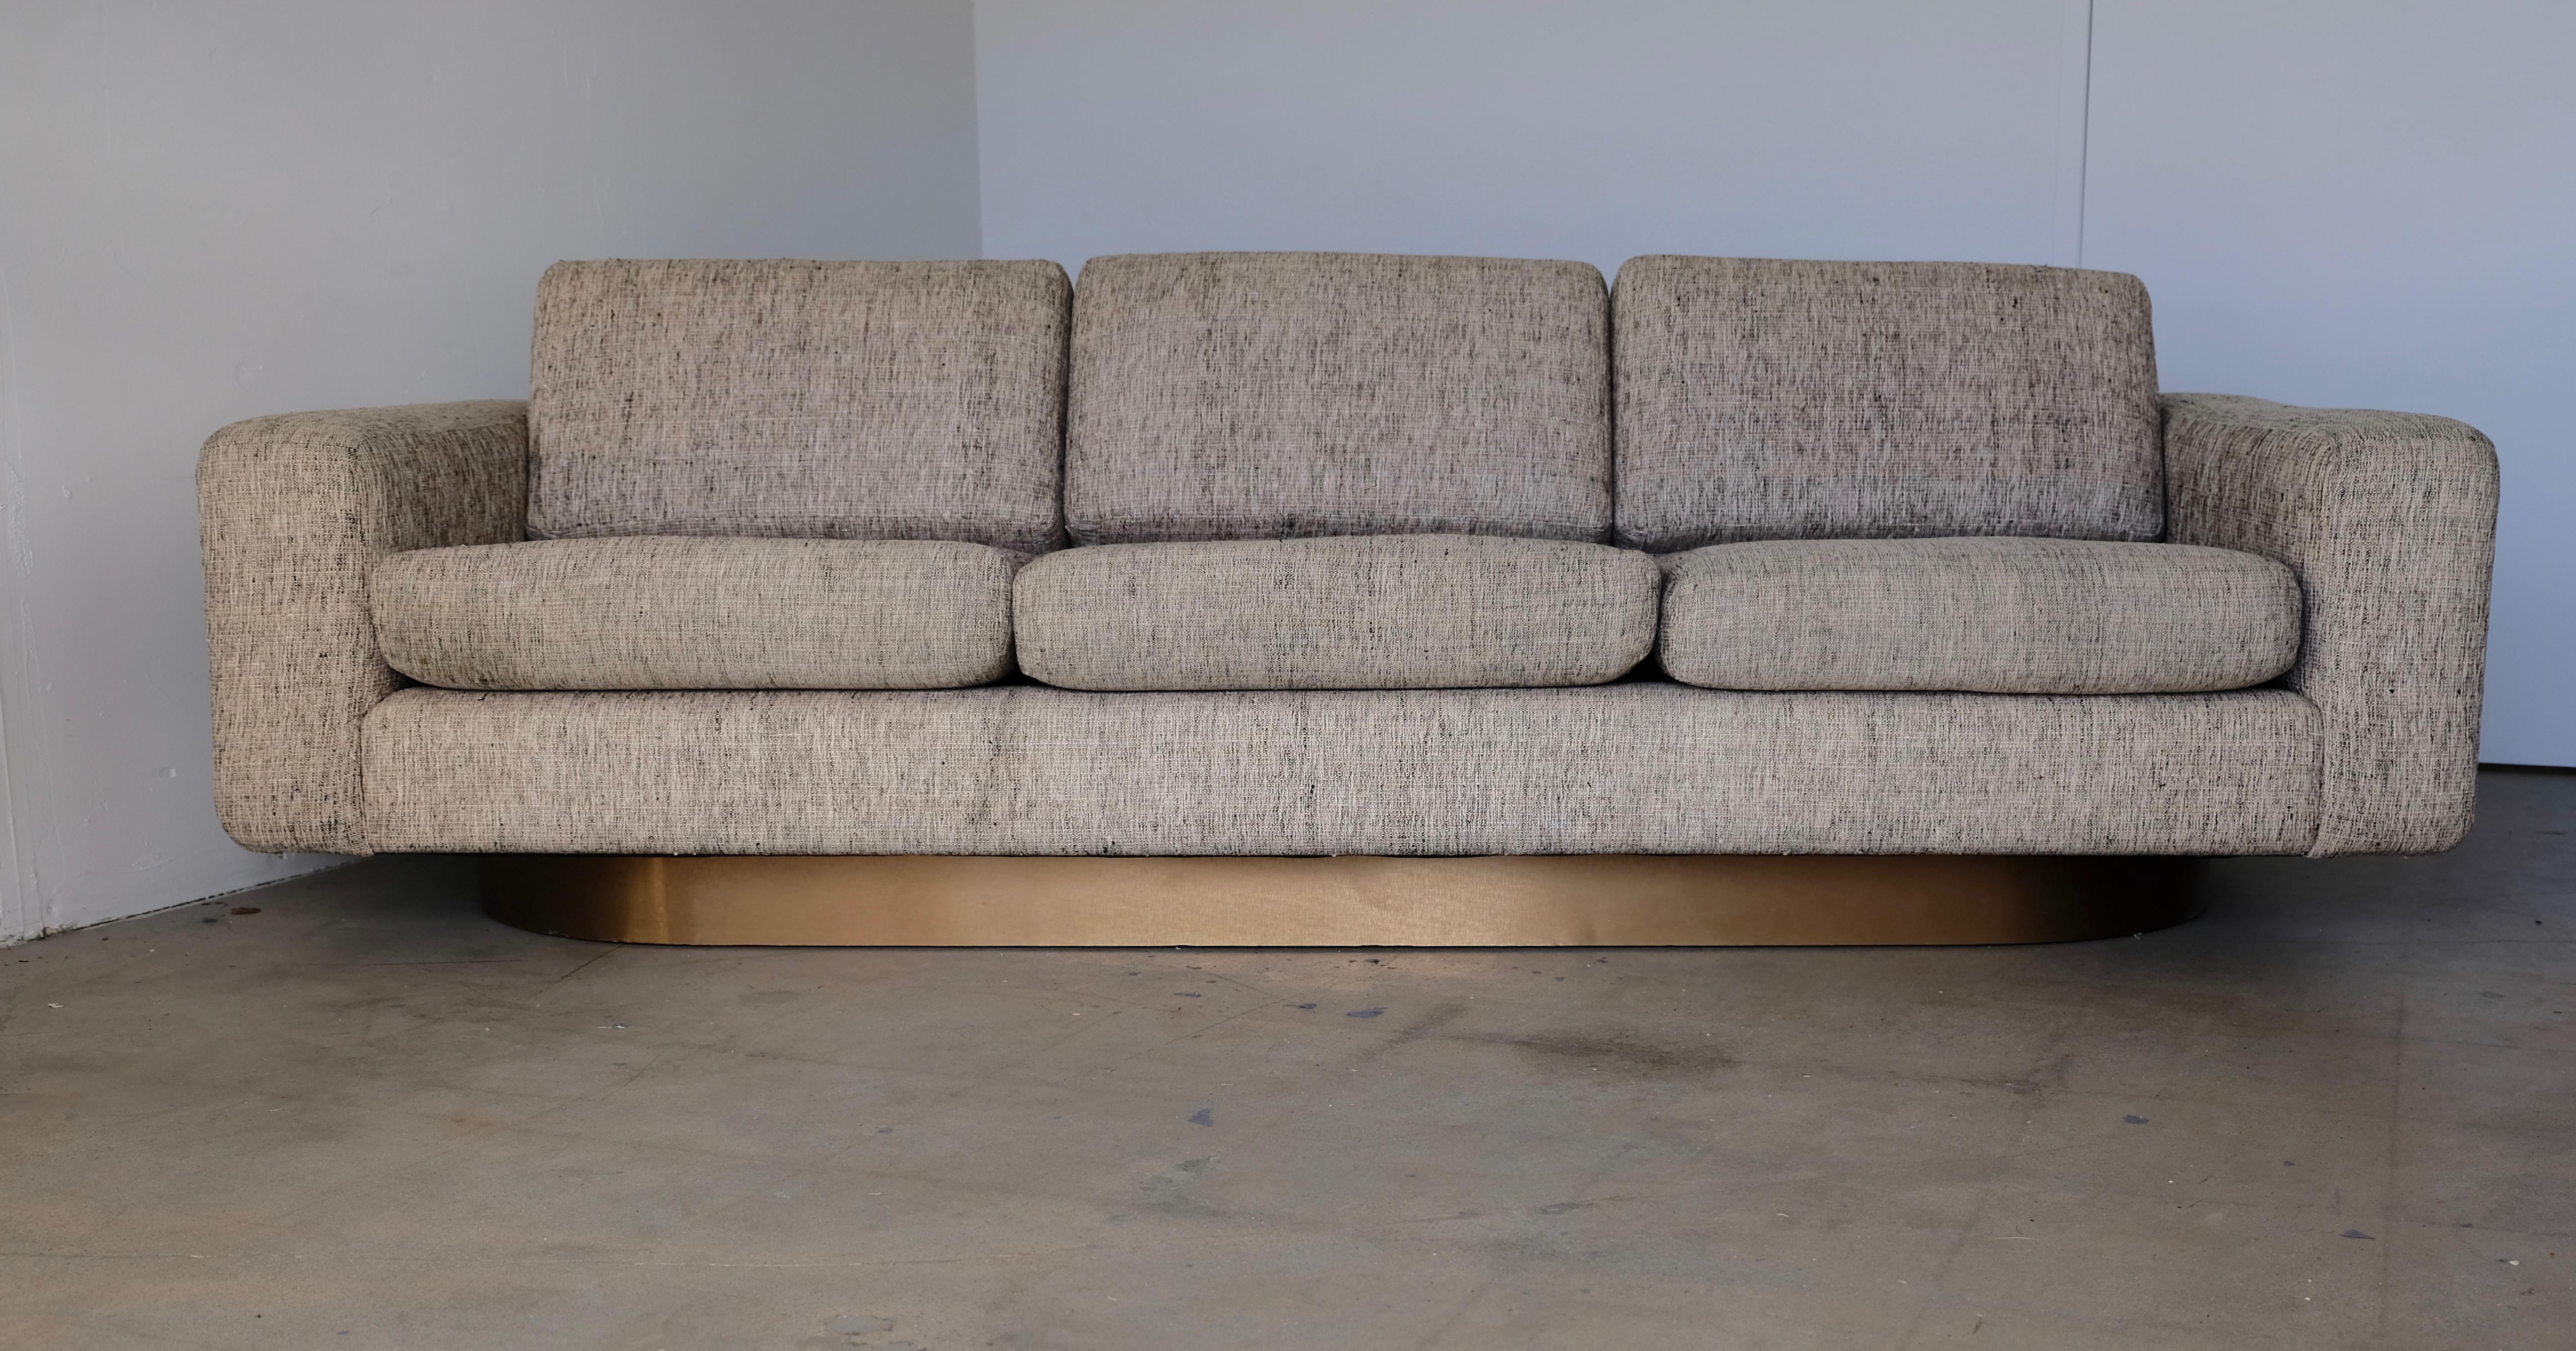 This custom modern three-seat couch has Classic midcentury lines. It floats on an oval shaped brushed brass covered base. The sofa retains its original tweed fabric which appears to be a silk blend. Measures: The arm height is 23